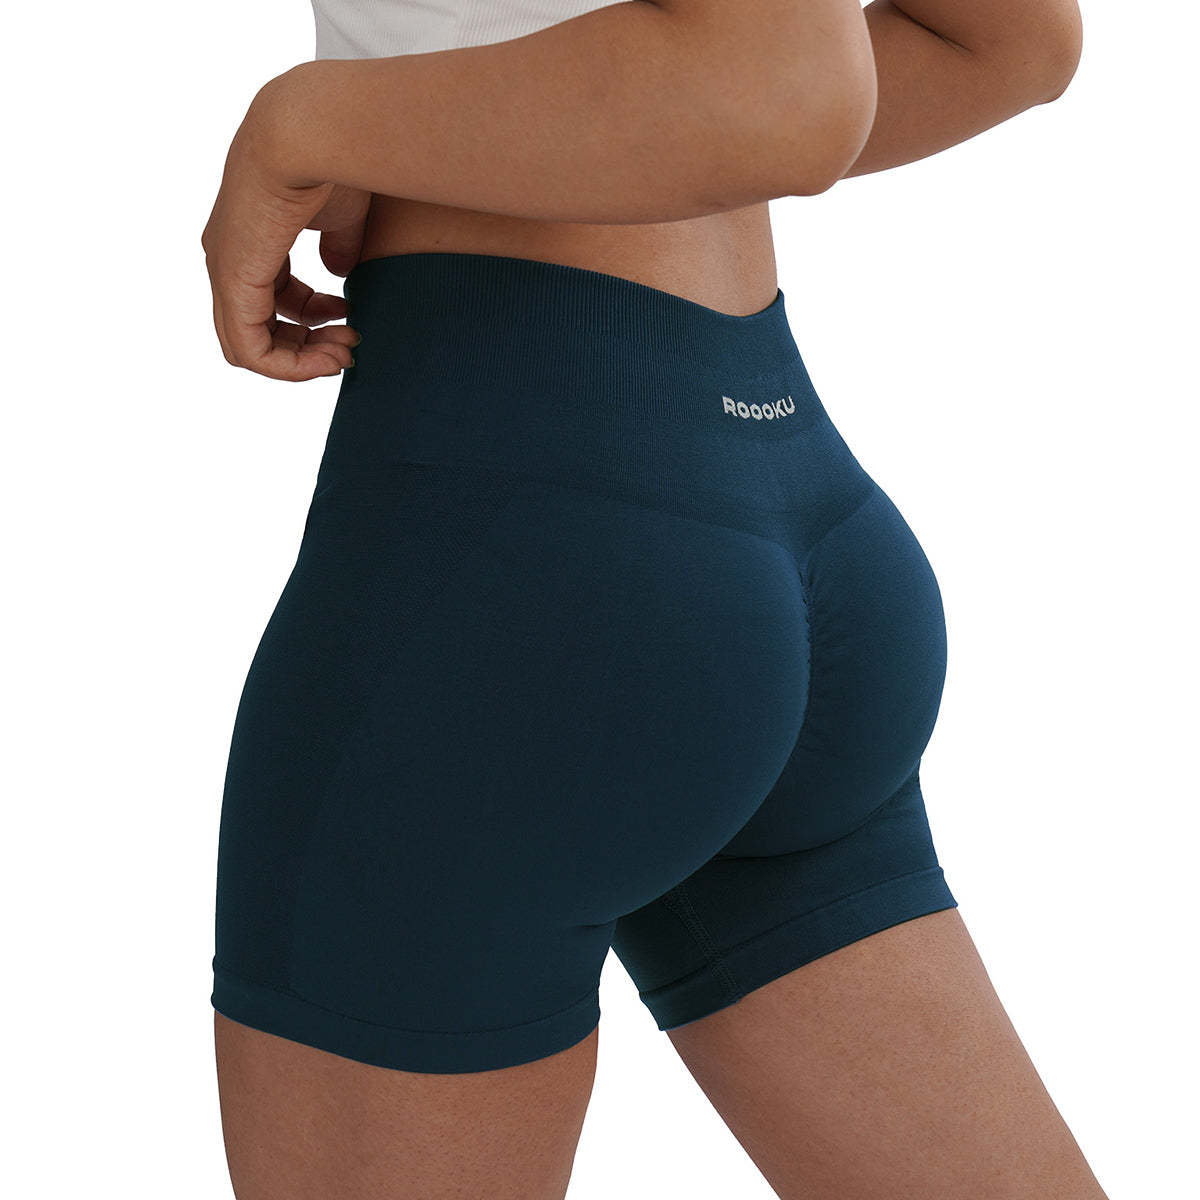 High Waisted camel toe proof workout shorts